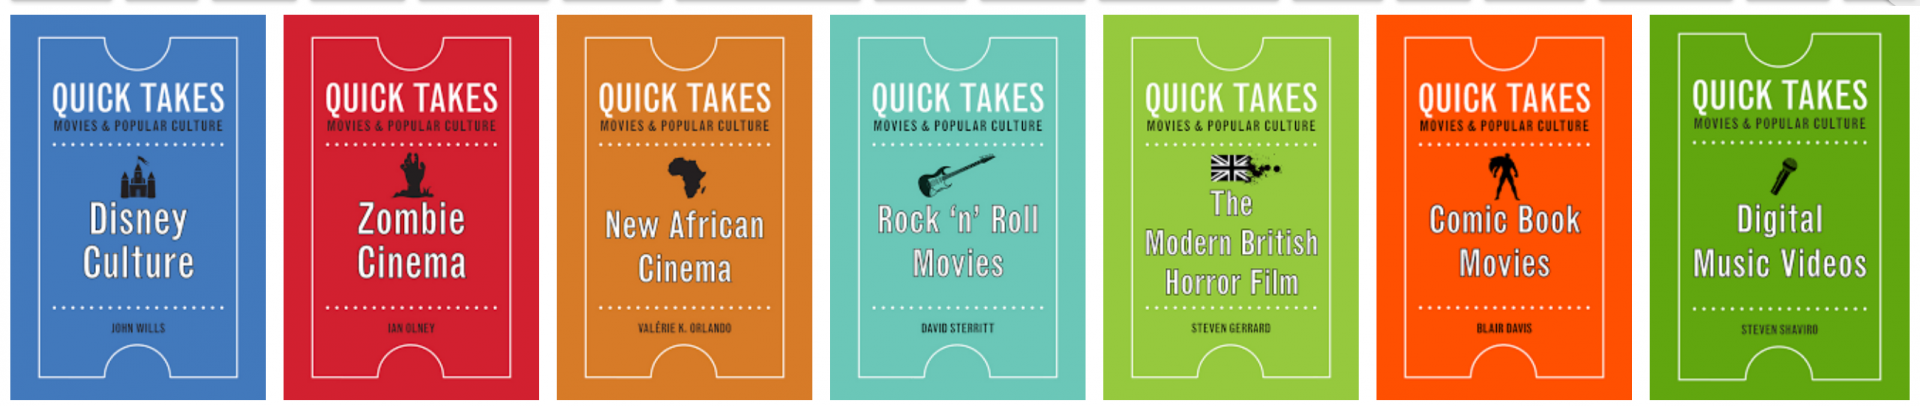 Quick Takes book series covers